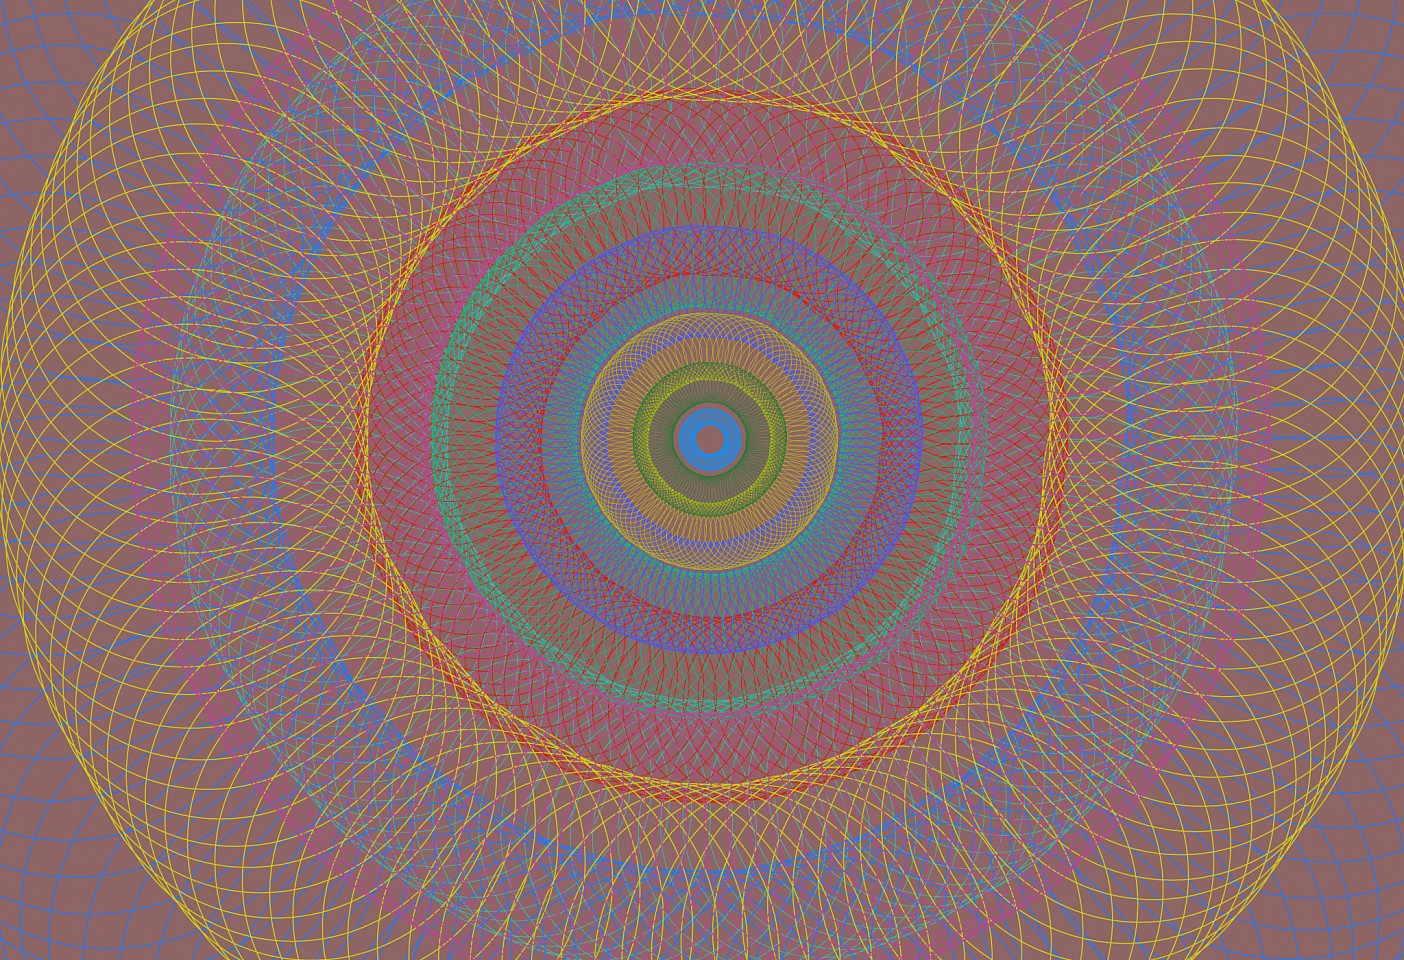 Dane Albert, Circles #36 Dusk, 2023
Acrylic on canvas (Concept), 48 x 72 in. (121.9 x 182.9 cm)
Series of colored lines and shapes in multiple configurations
DA.2023-036-dusk